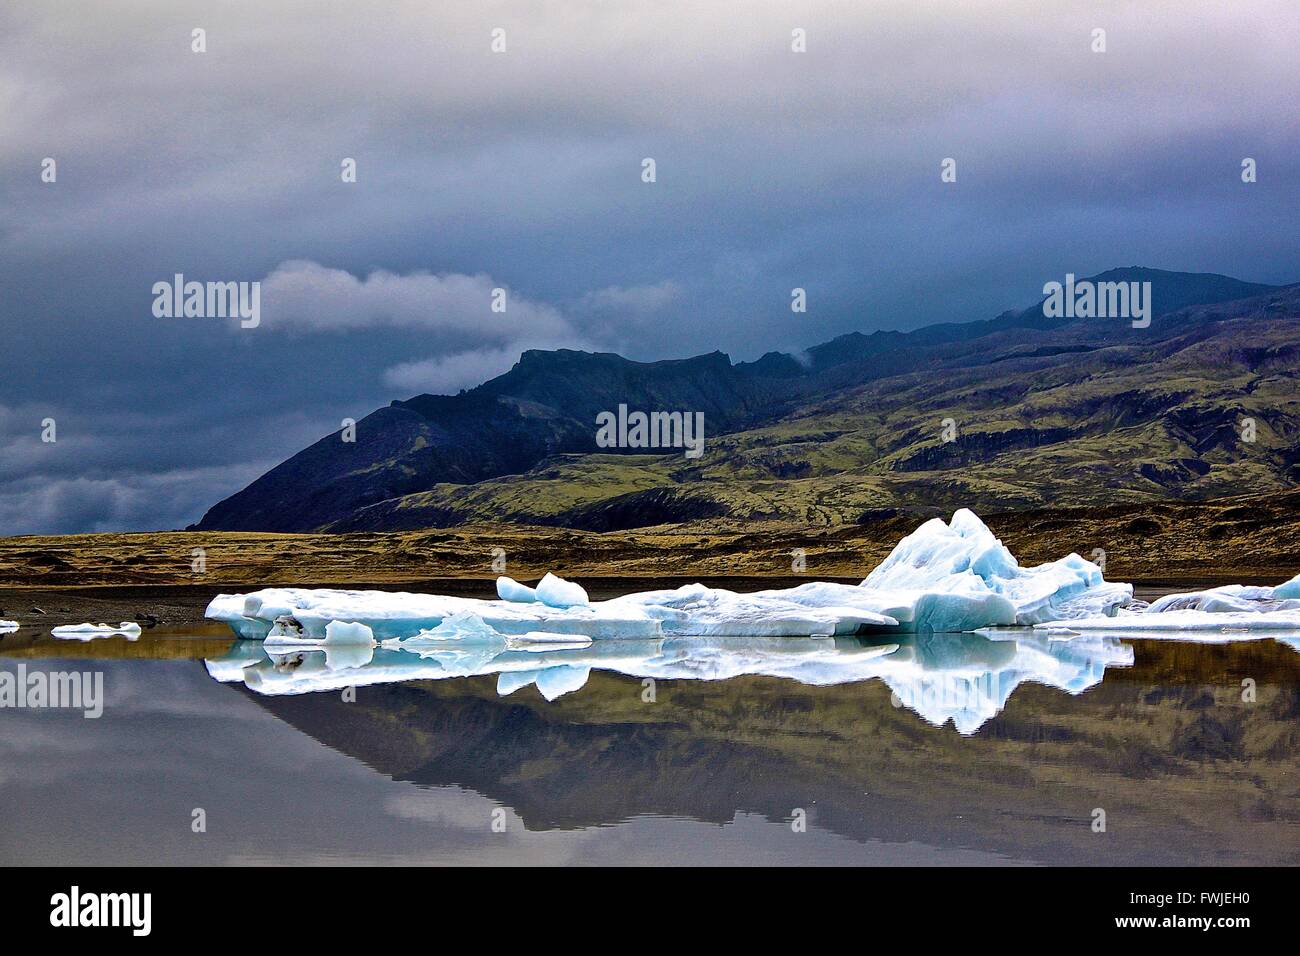 Ice Floating In River By Mountains Against Cloudy Sky Stock Photo